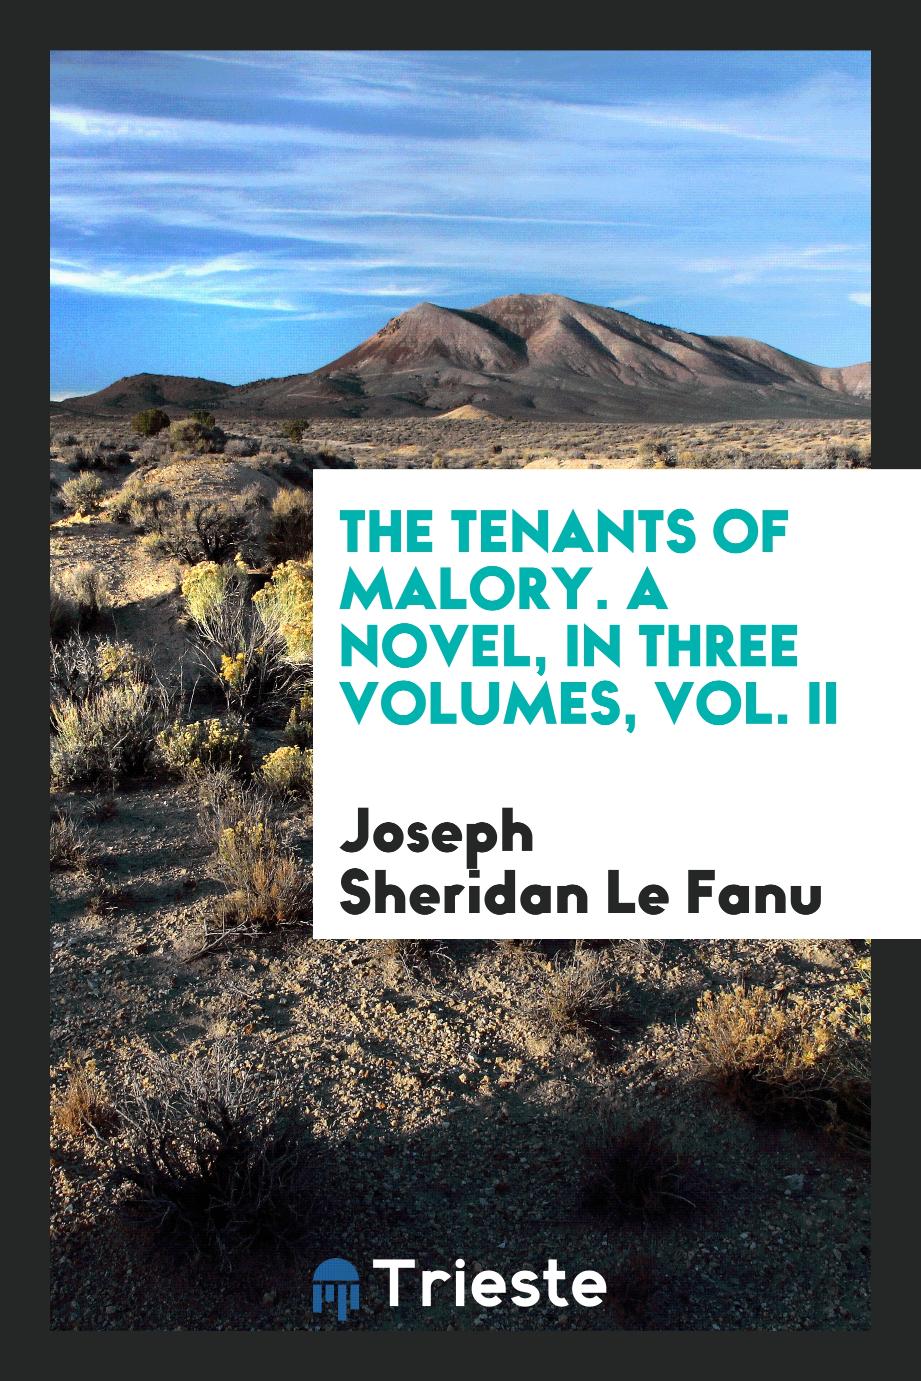 The tenants of Malory. A novel, in three volumes, Vol. II